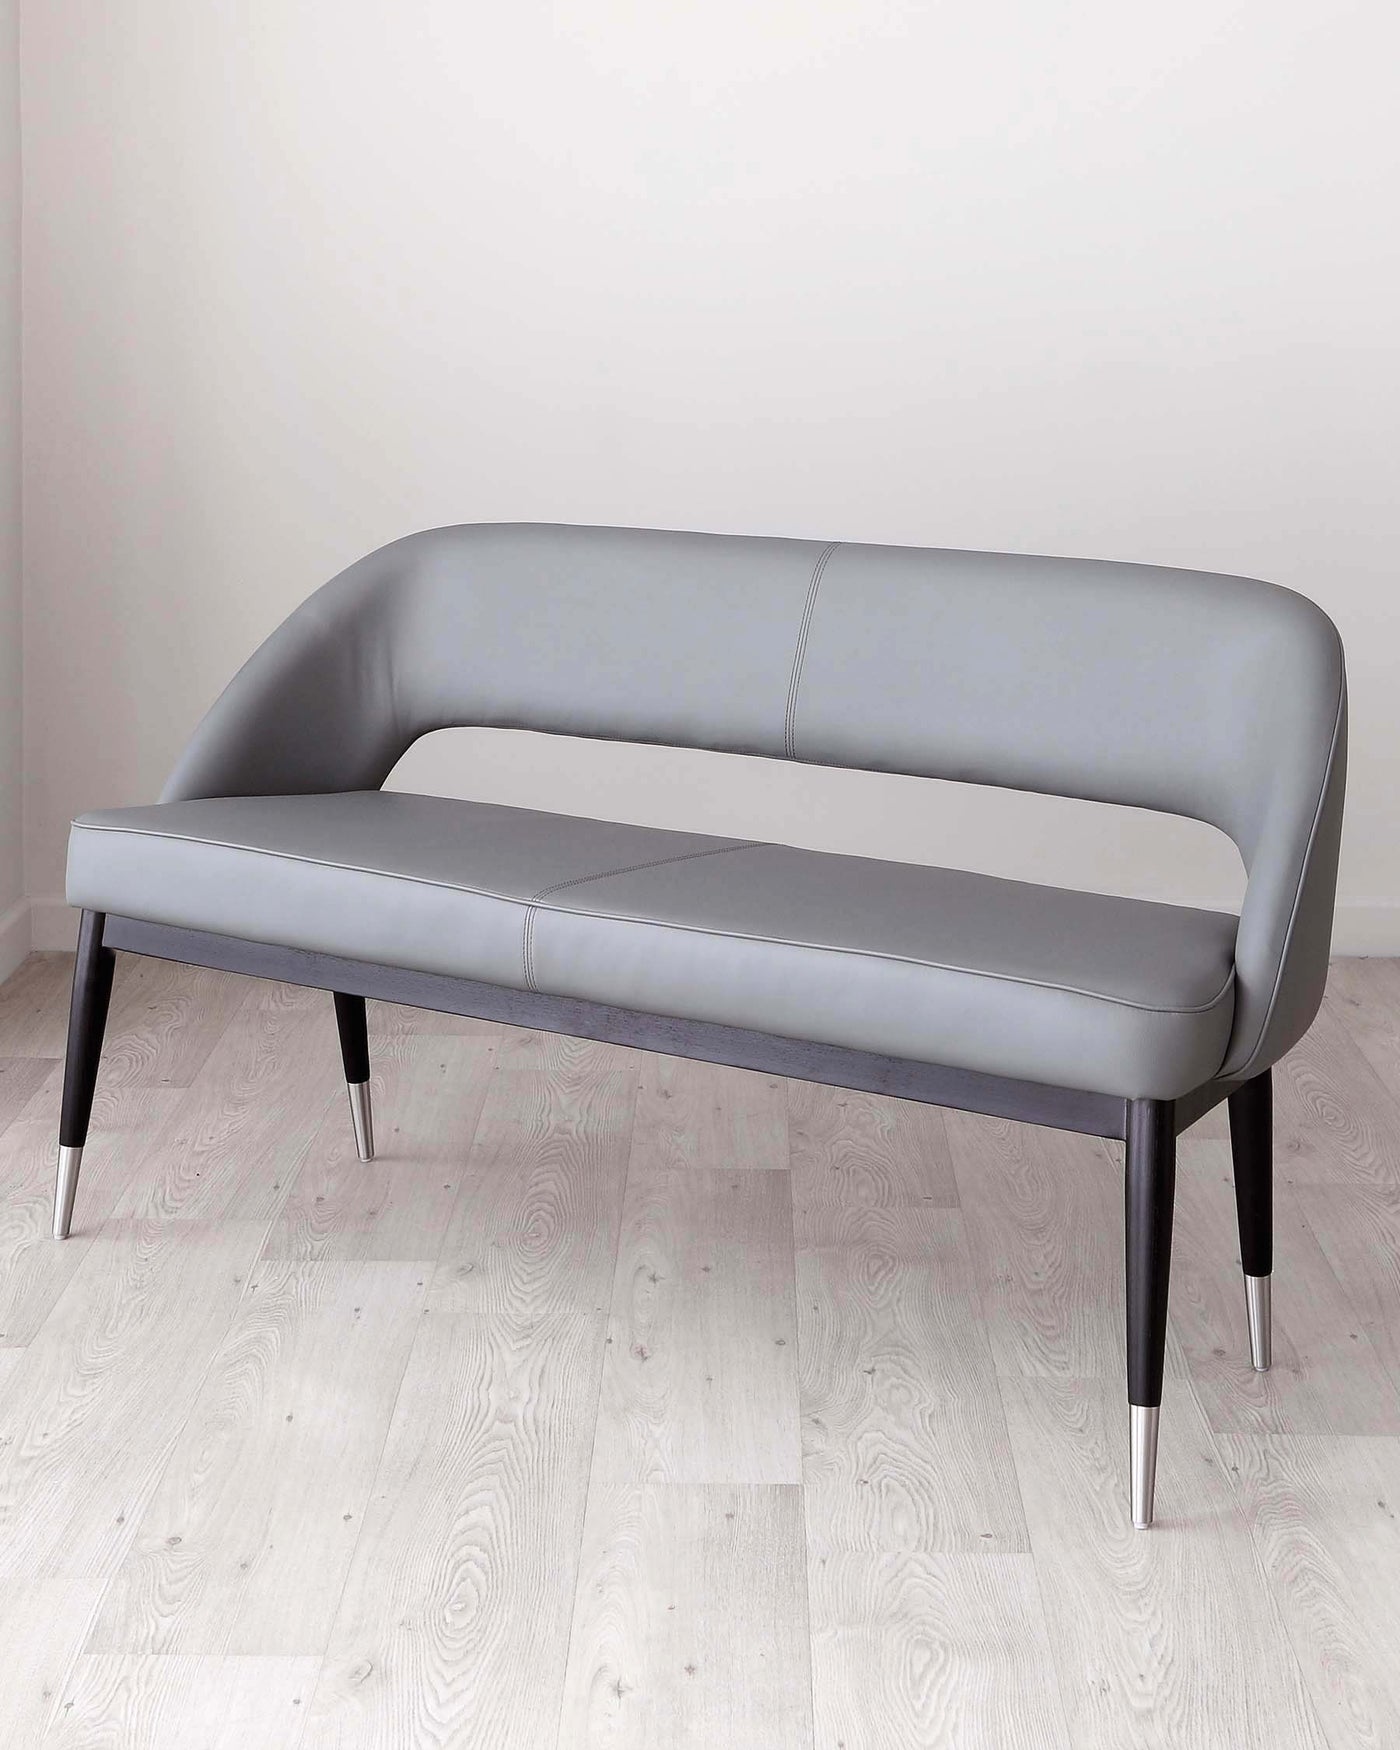 Modern minimalist two-seater sofa with a sleek, curved silhouette, upholstered in a light grey, leather-like material with subtle horizontal stitching. The sofa features a low back and arms, gently arched for a fluid, contemporary design. It stands on four tapered legs, the front two capped with metallic accents, complementing its sophisticated and chic aesthetic.